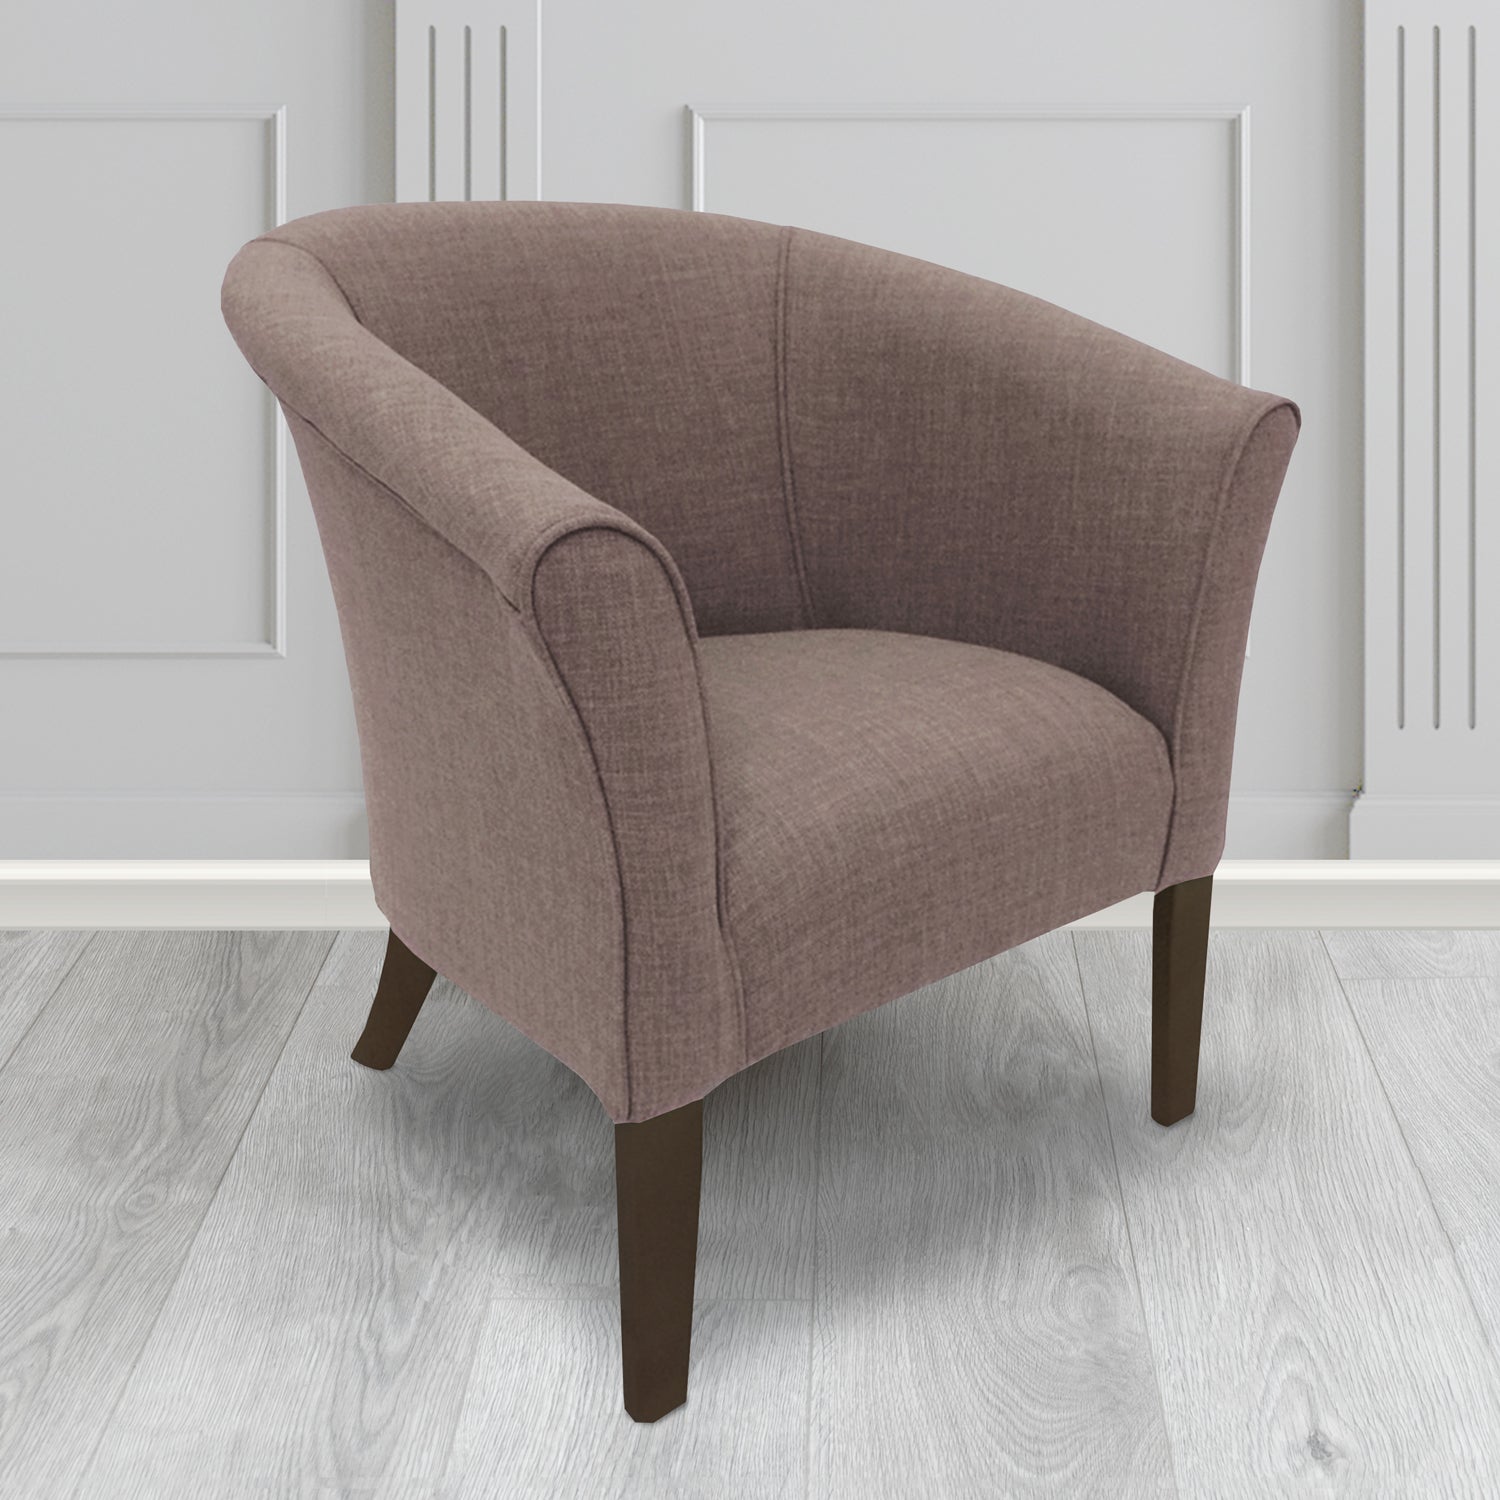 Quill Tub Chair in Linetta Slate Crib 5 Plain Fabric - Antimicrobial, Stain Resistant & Waterproof - The Tub Chair Shop